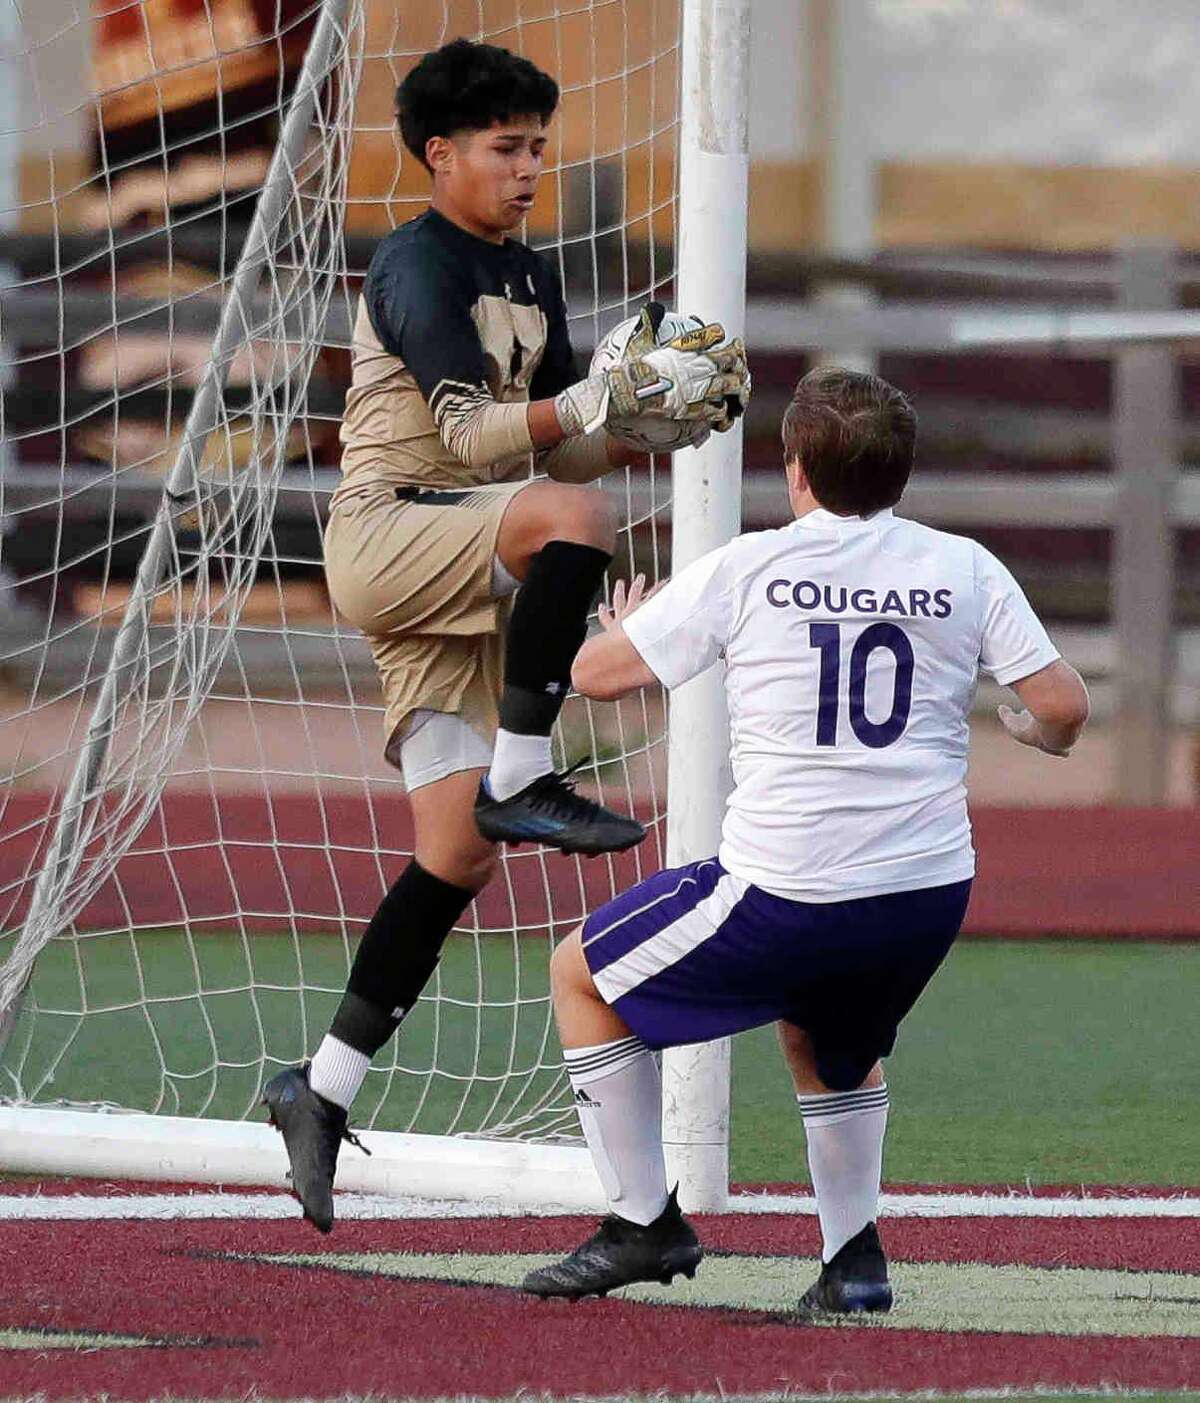 Magnolia West goalie Juan Delapaz (0) makes a stop in the first period of a high school soccer match at Magnolia High School, Tuesday, March 22, 2022, in Magnolia